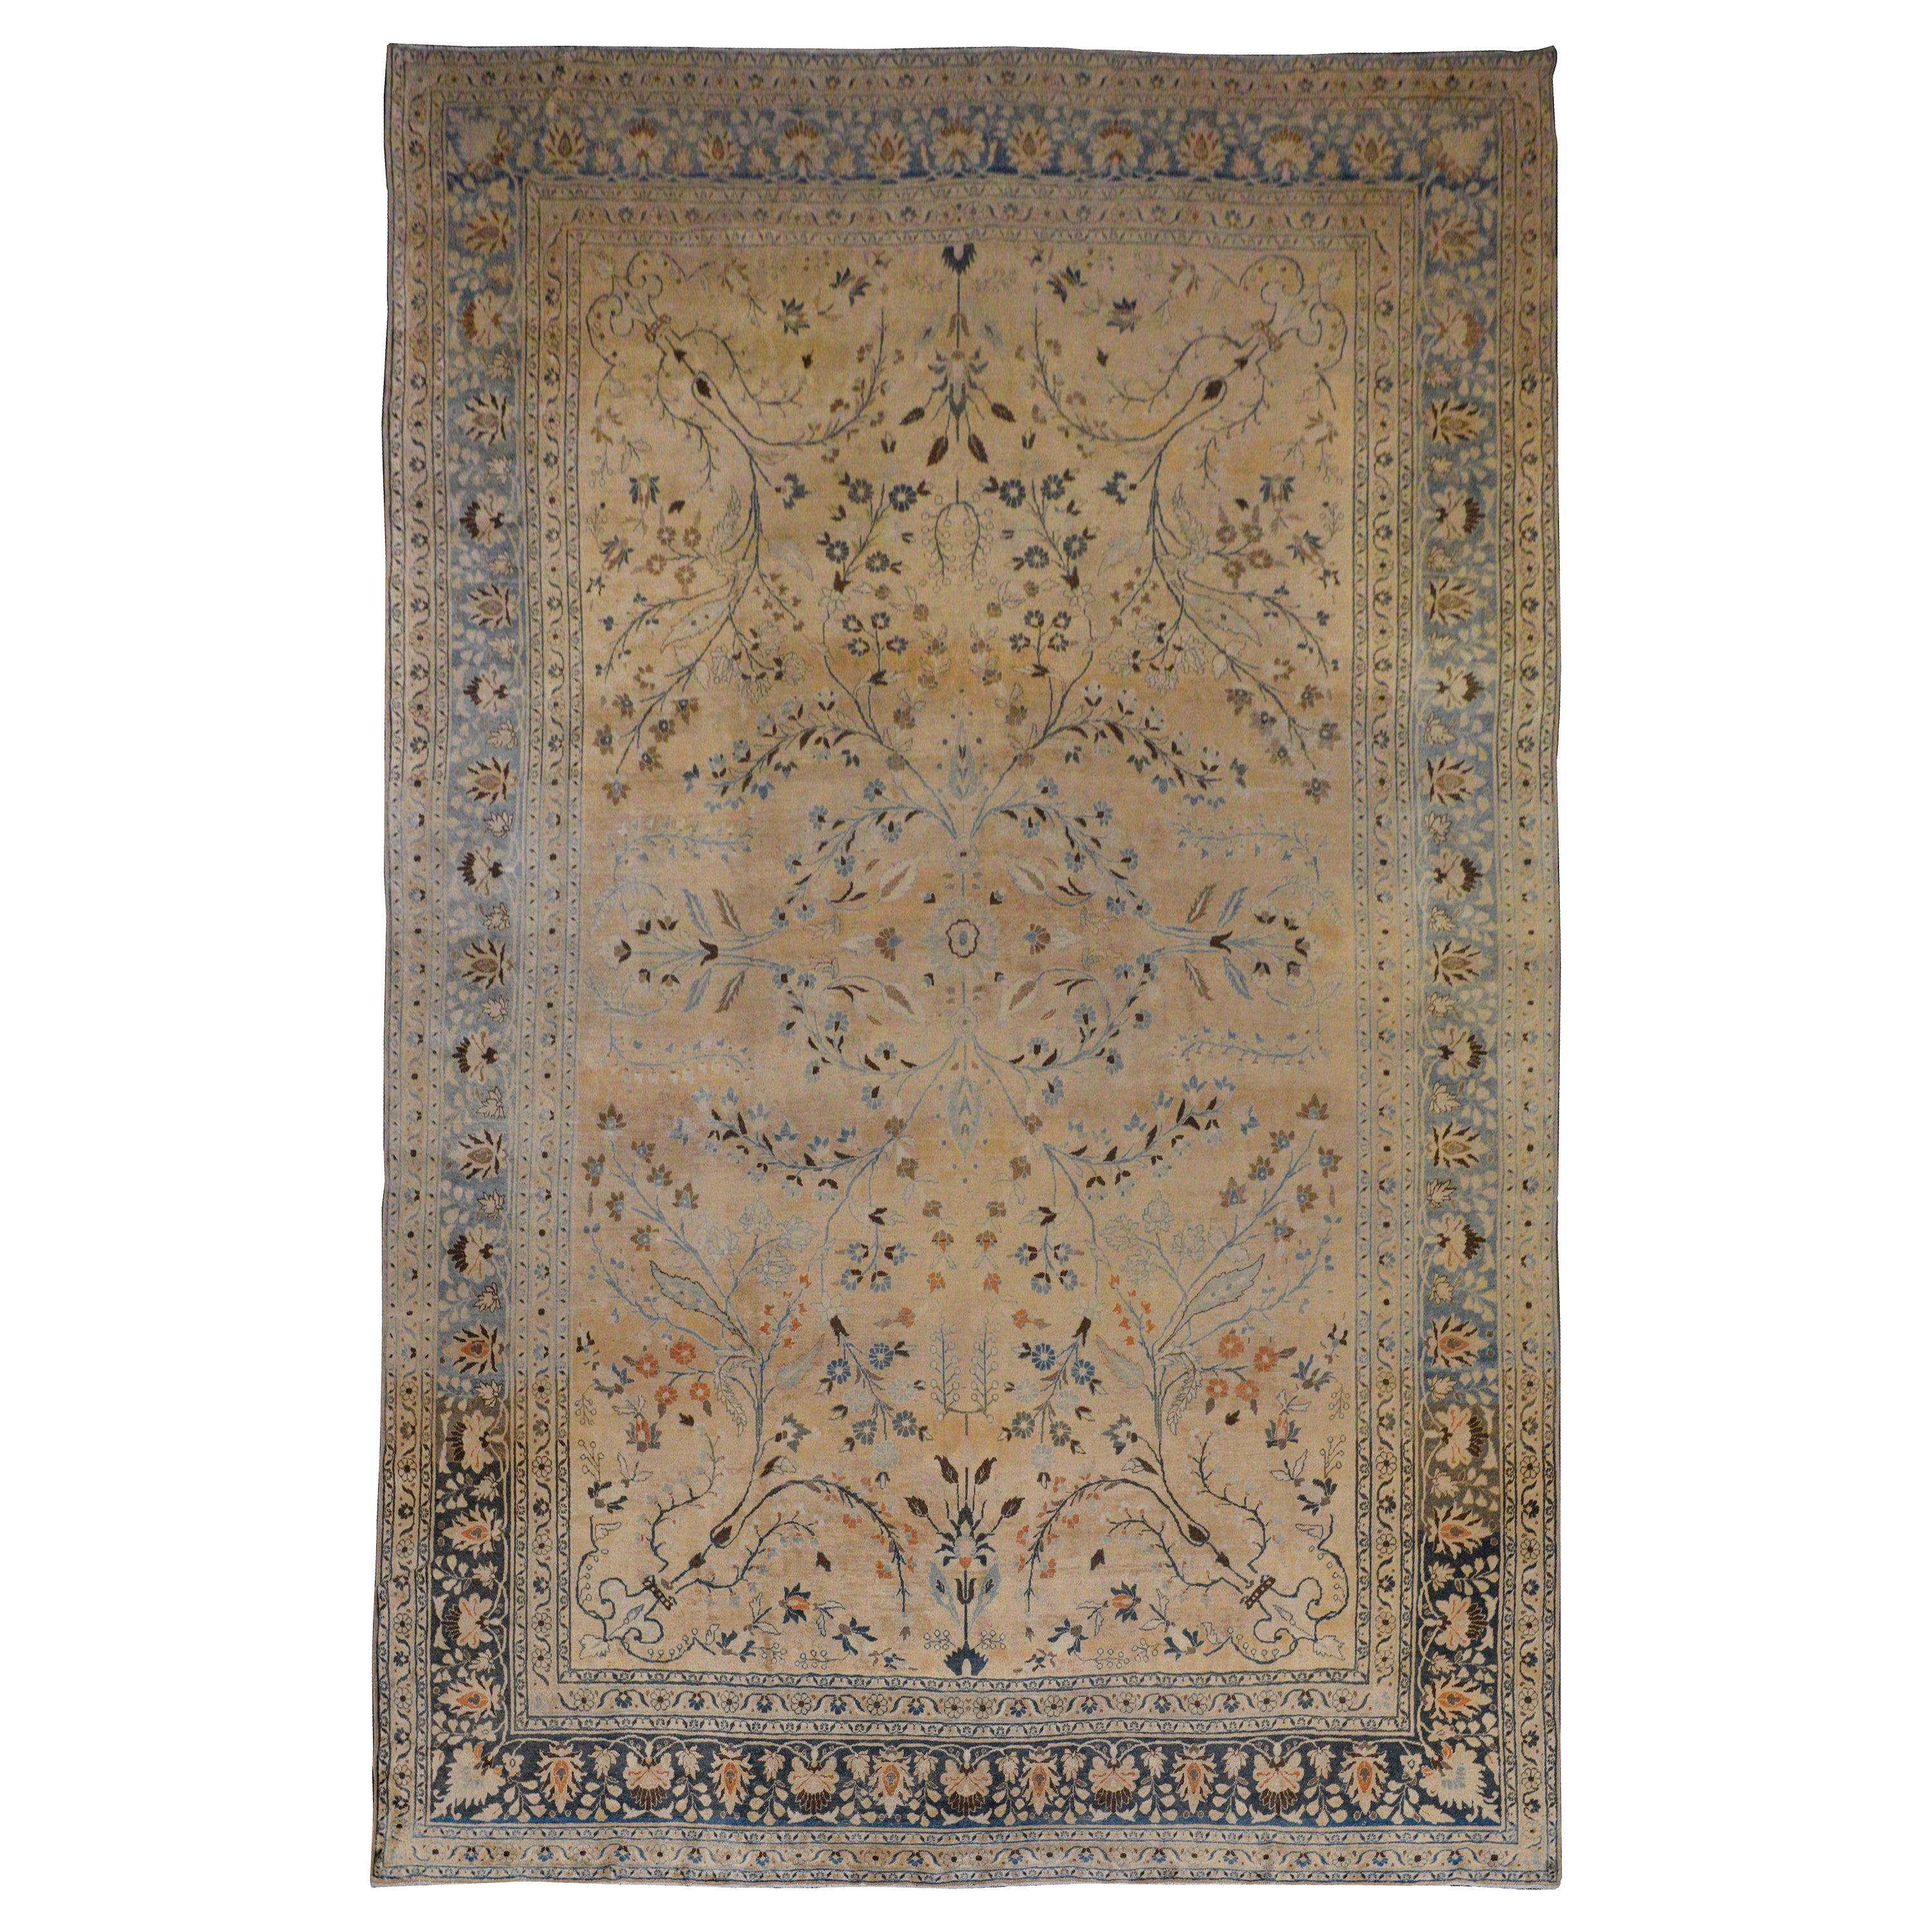 Exquisite Early 20th Century Tabriz Rug